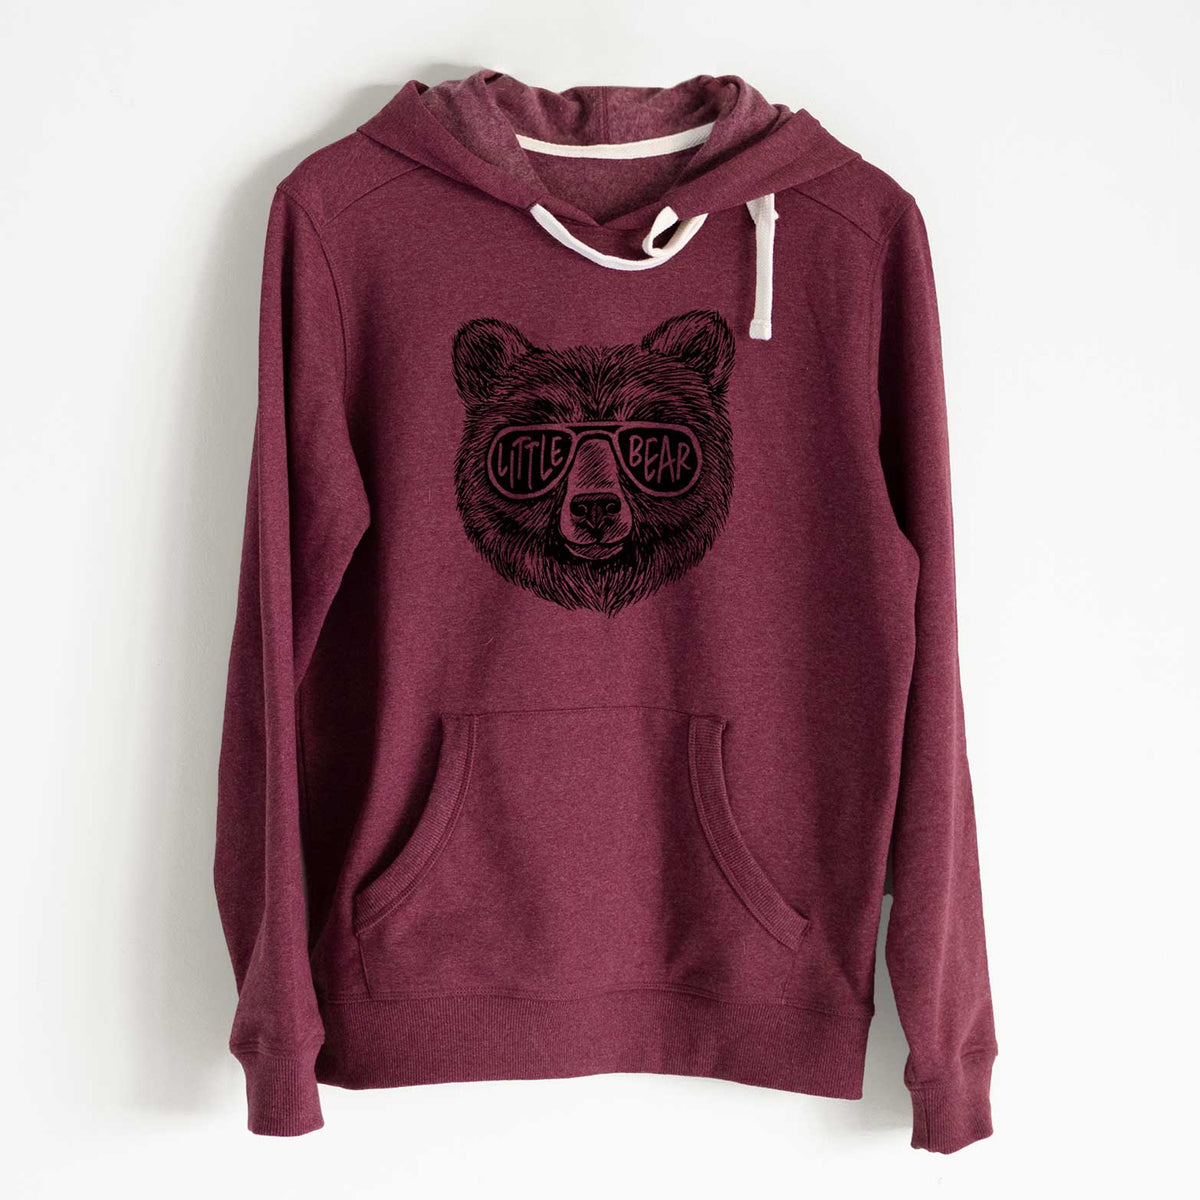 Little Bear - Unisex Recycled Hoodie - CLOSEOUT - FINAL SALE